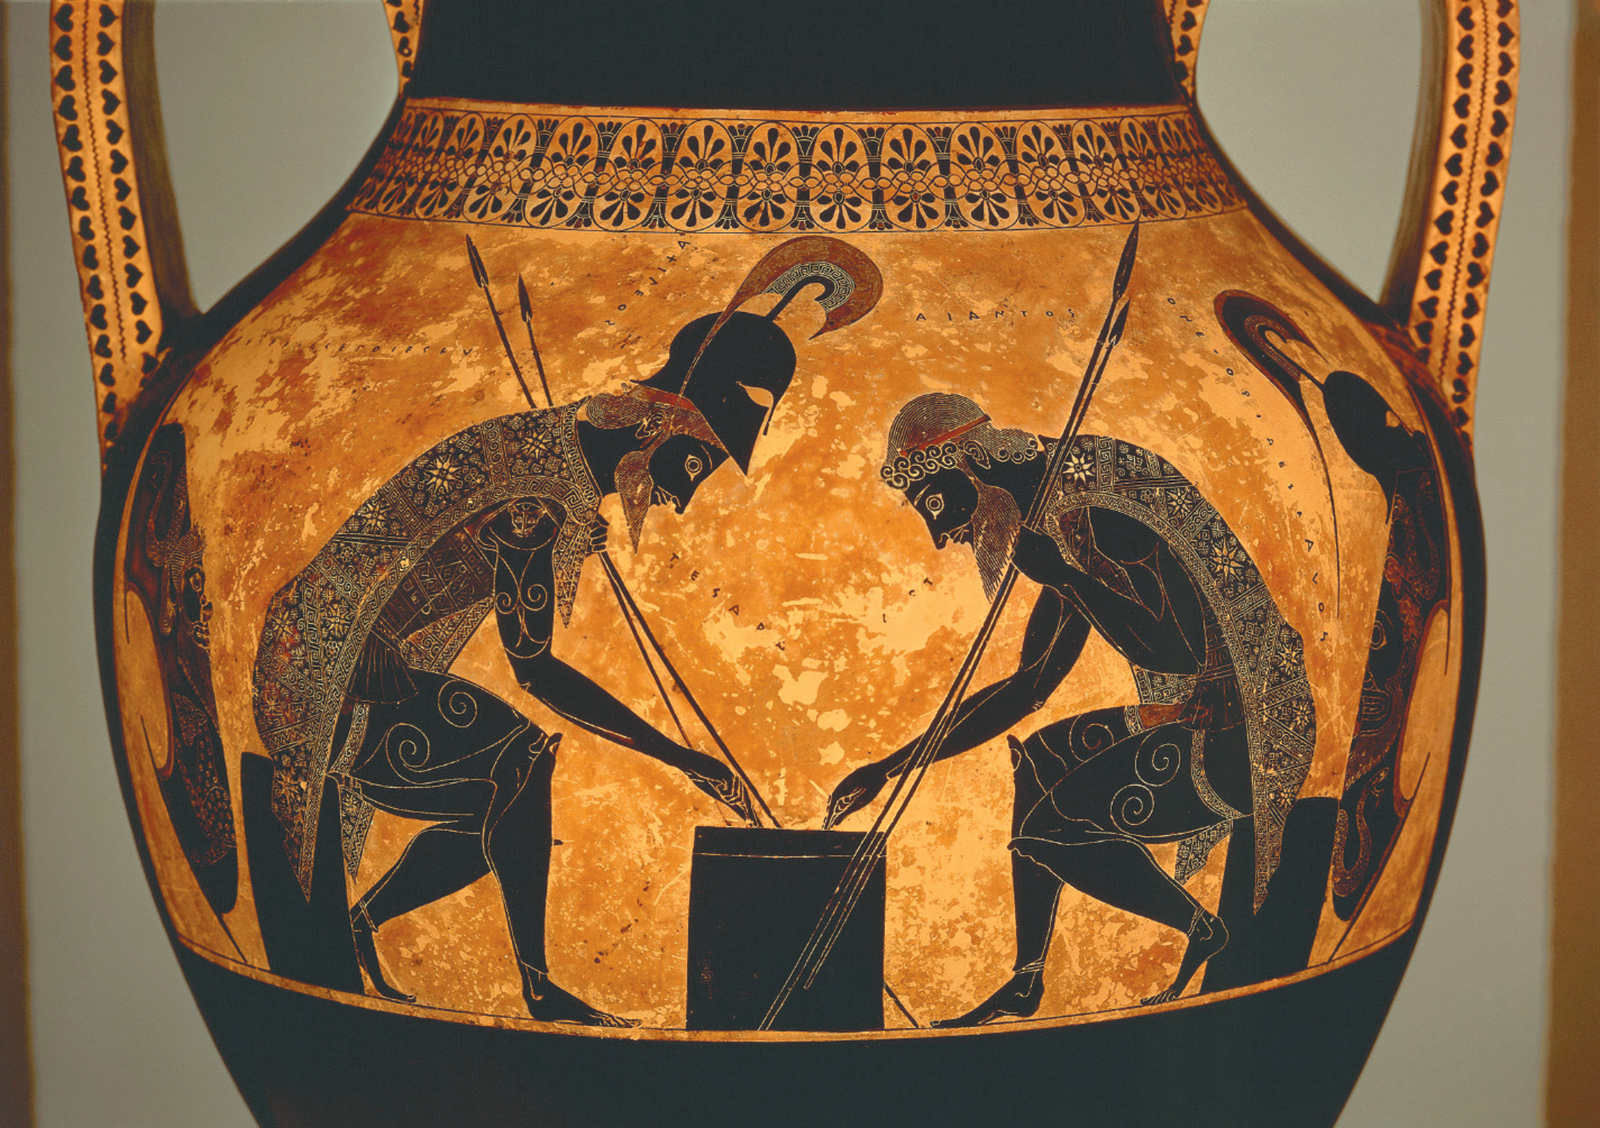 ‘Achilles and Ajax playing dice’; Attic black-figure amphora by Exekias, from Vulci, Italy, circa 540–530 BCE